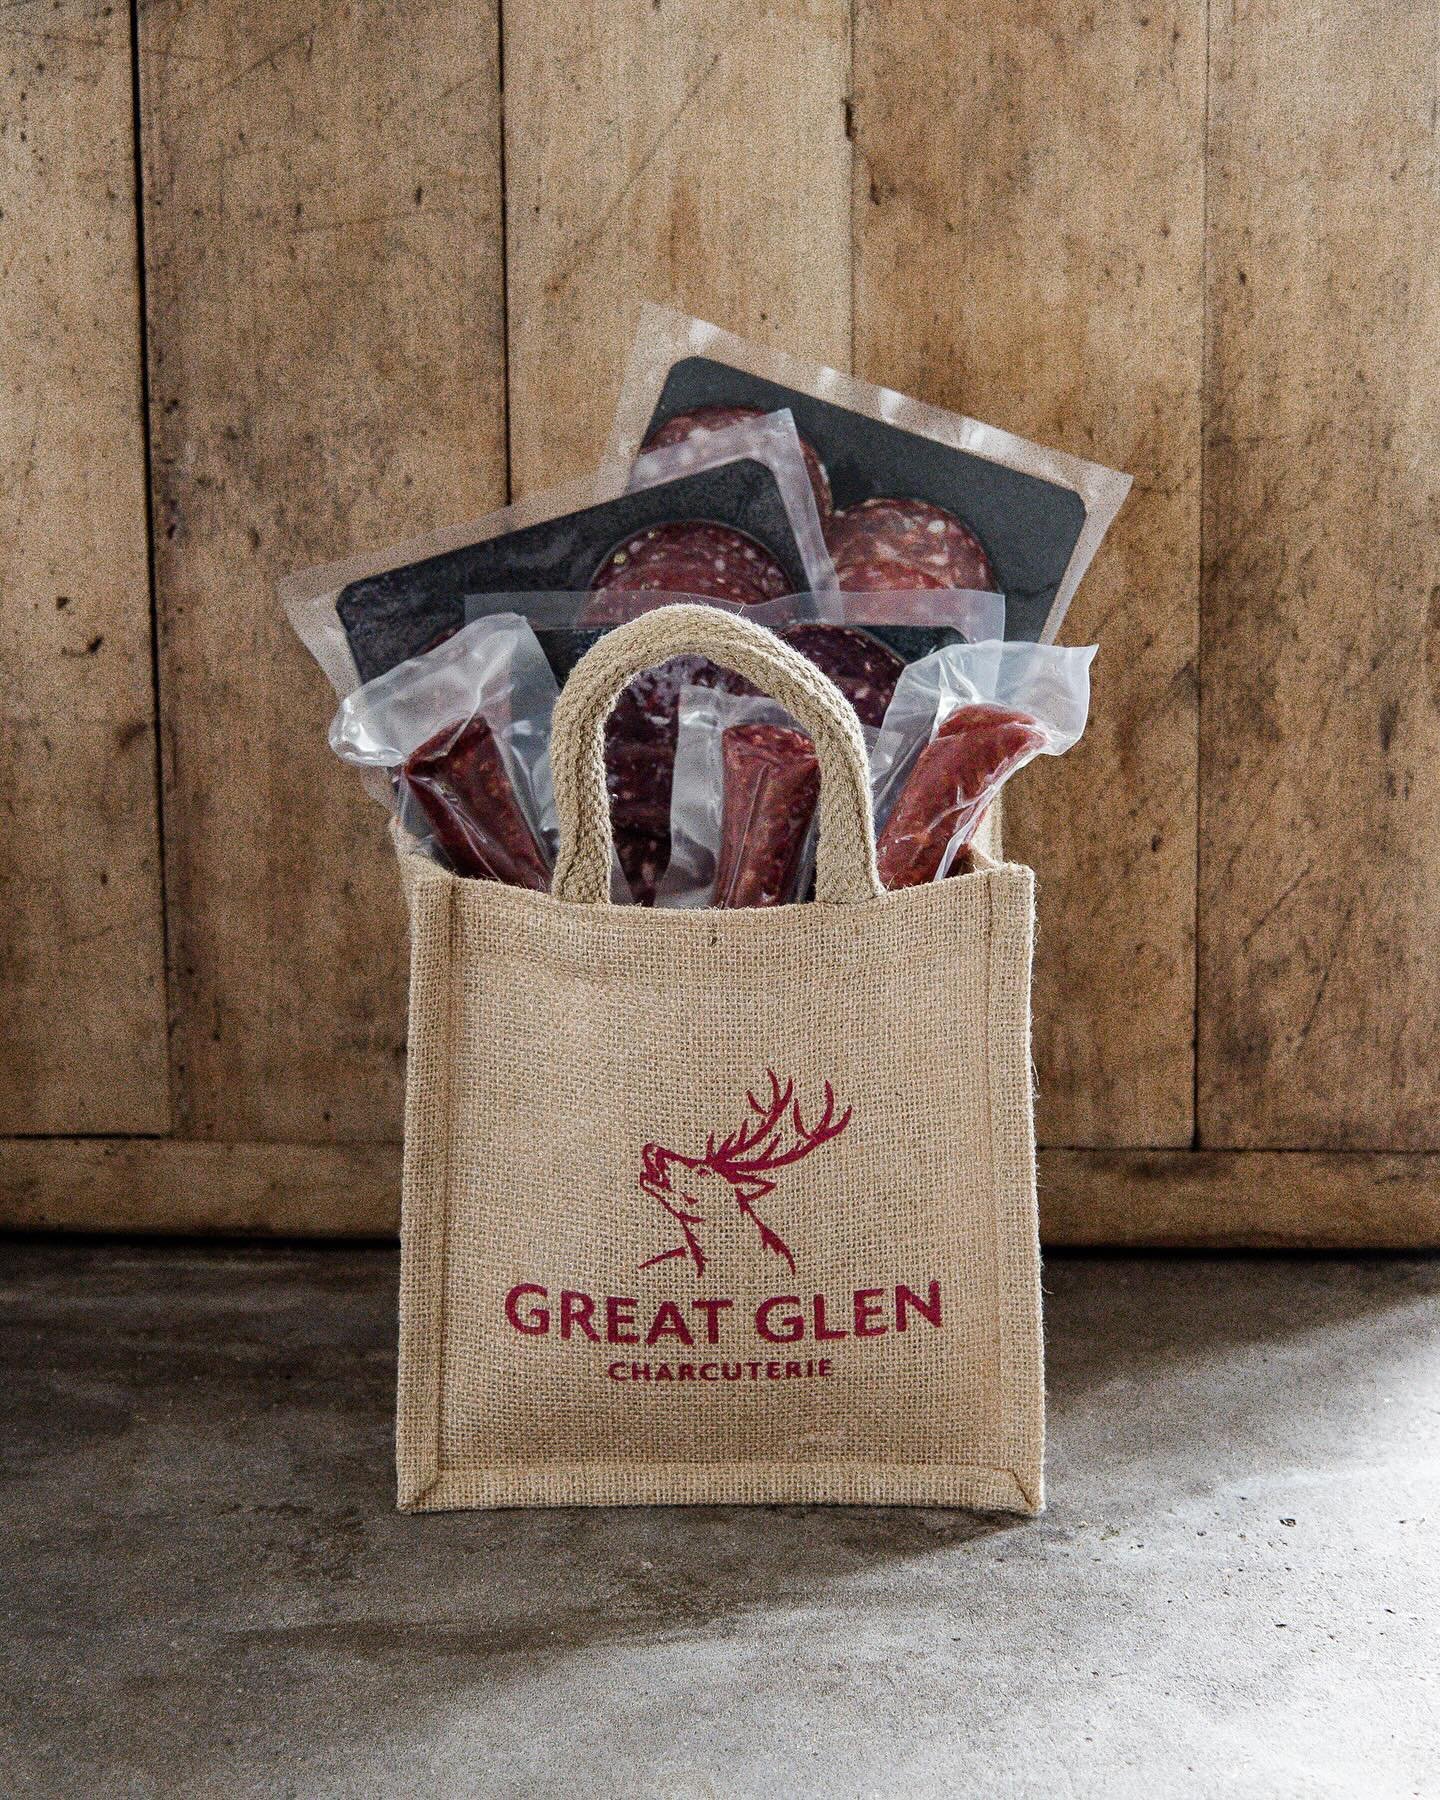 Gift Giving Highland Style 🌿🦌

Wow, what a week it&rsquo;s been! Our Wild Venison Charcuterie Gift Bag has been a hit, with orders pouring in from all over 📦

It&rsquo;s heartwarming to see so many of you spreading joy and sharing the love through